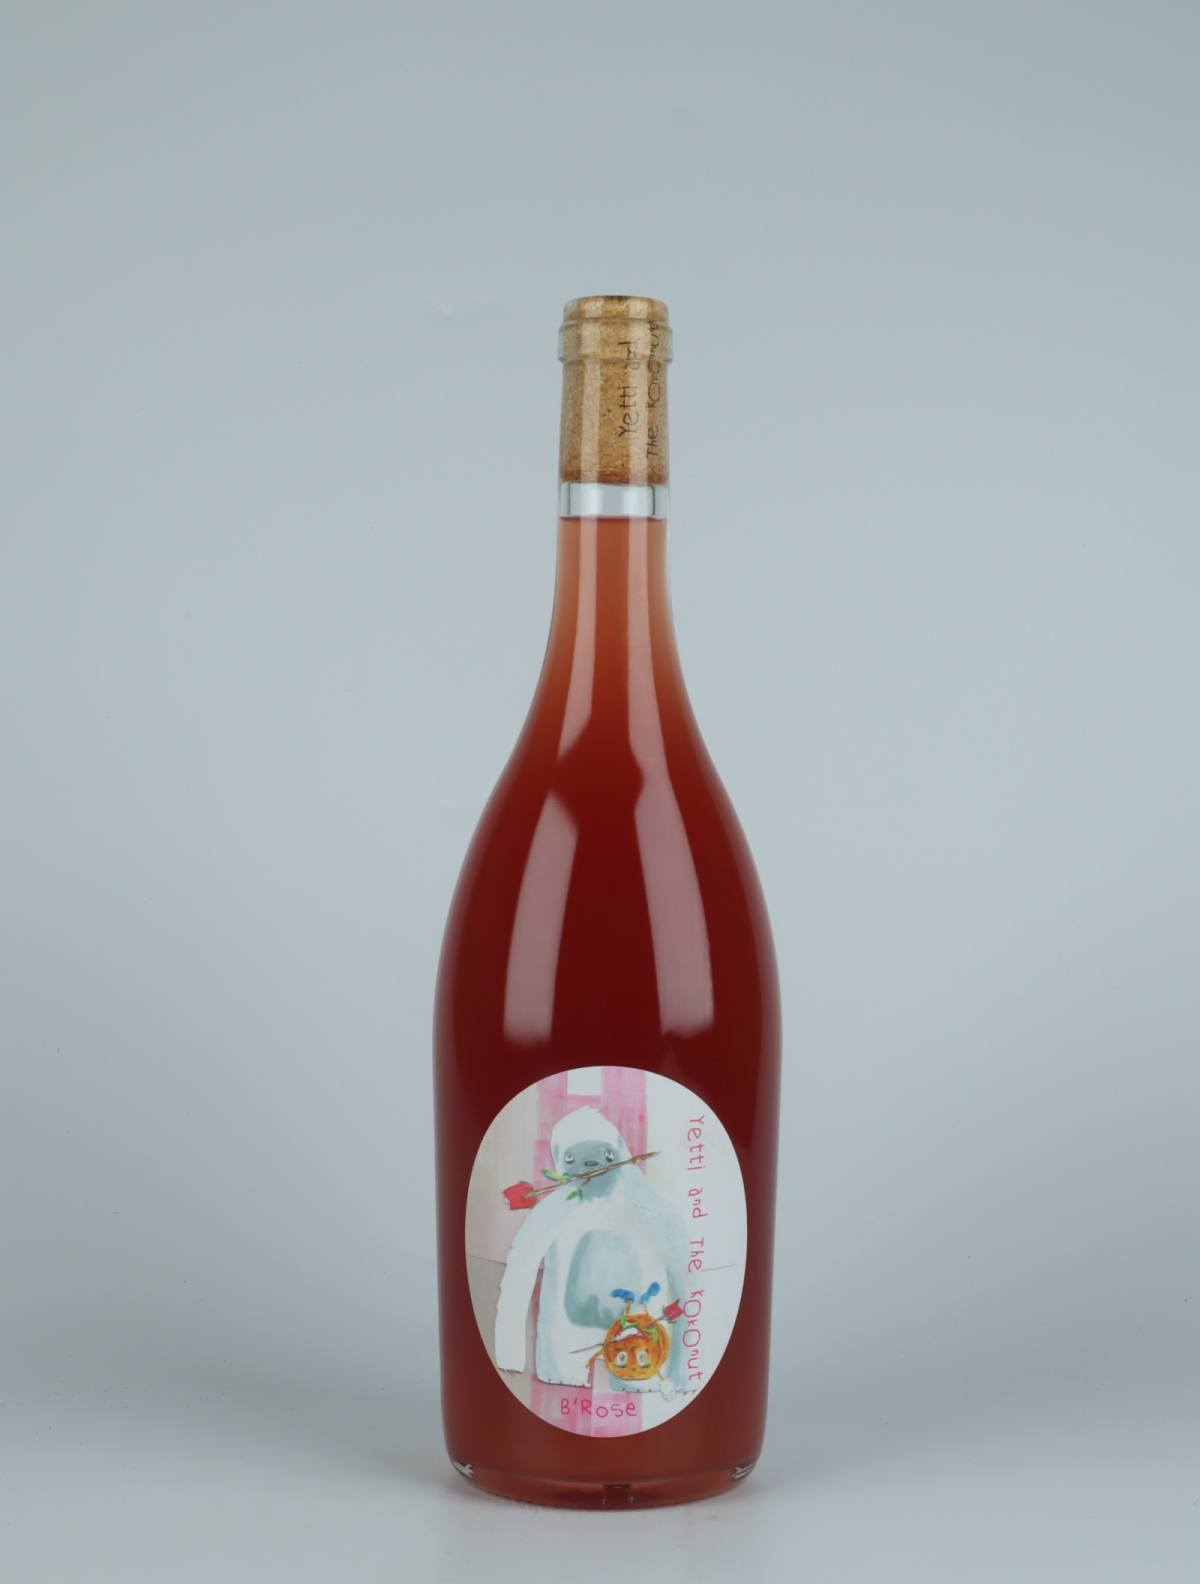 A bottle 2021 B'Rose Rosé from Yetti and the Kokonut, Adelaide Hills in 